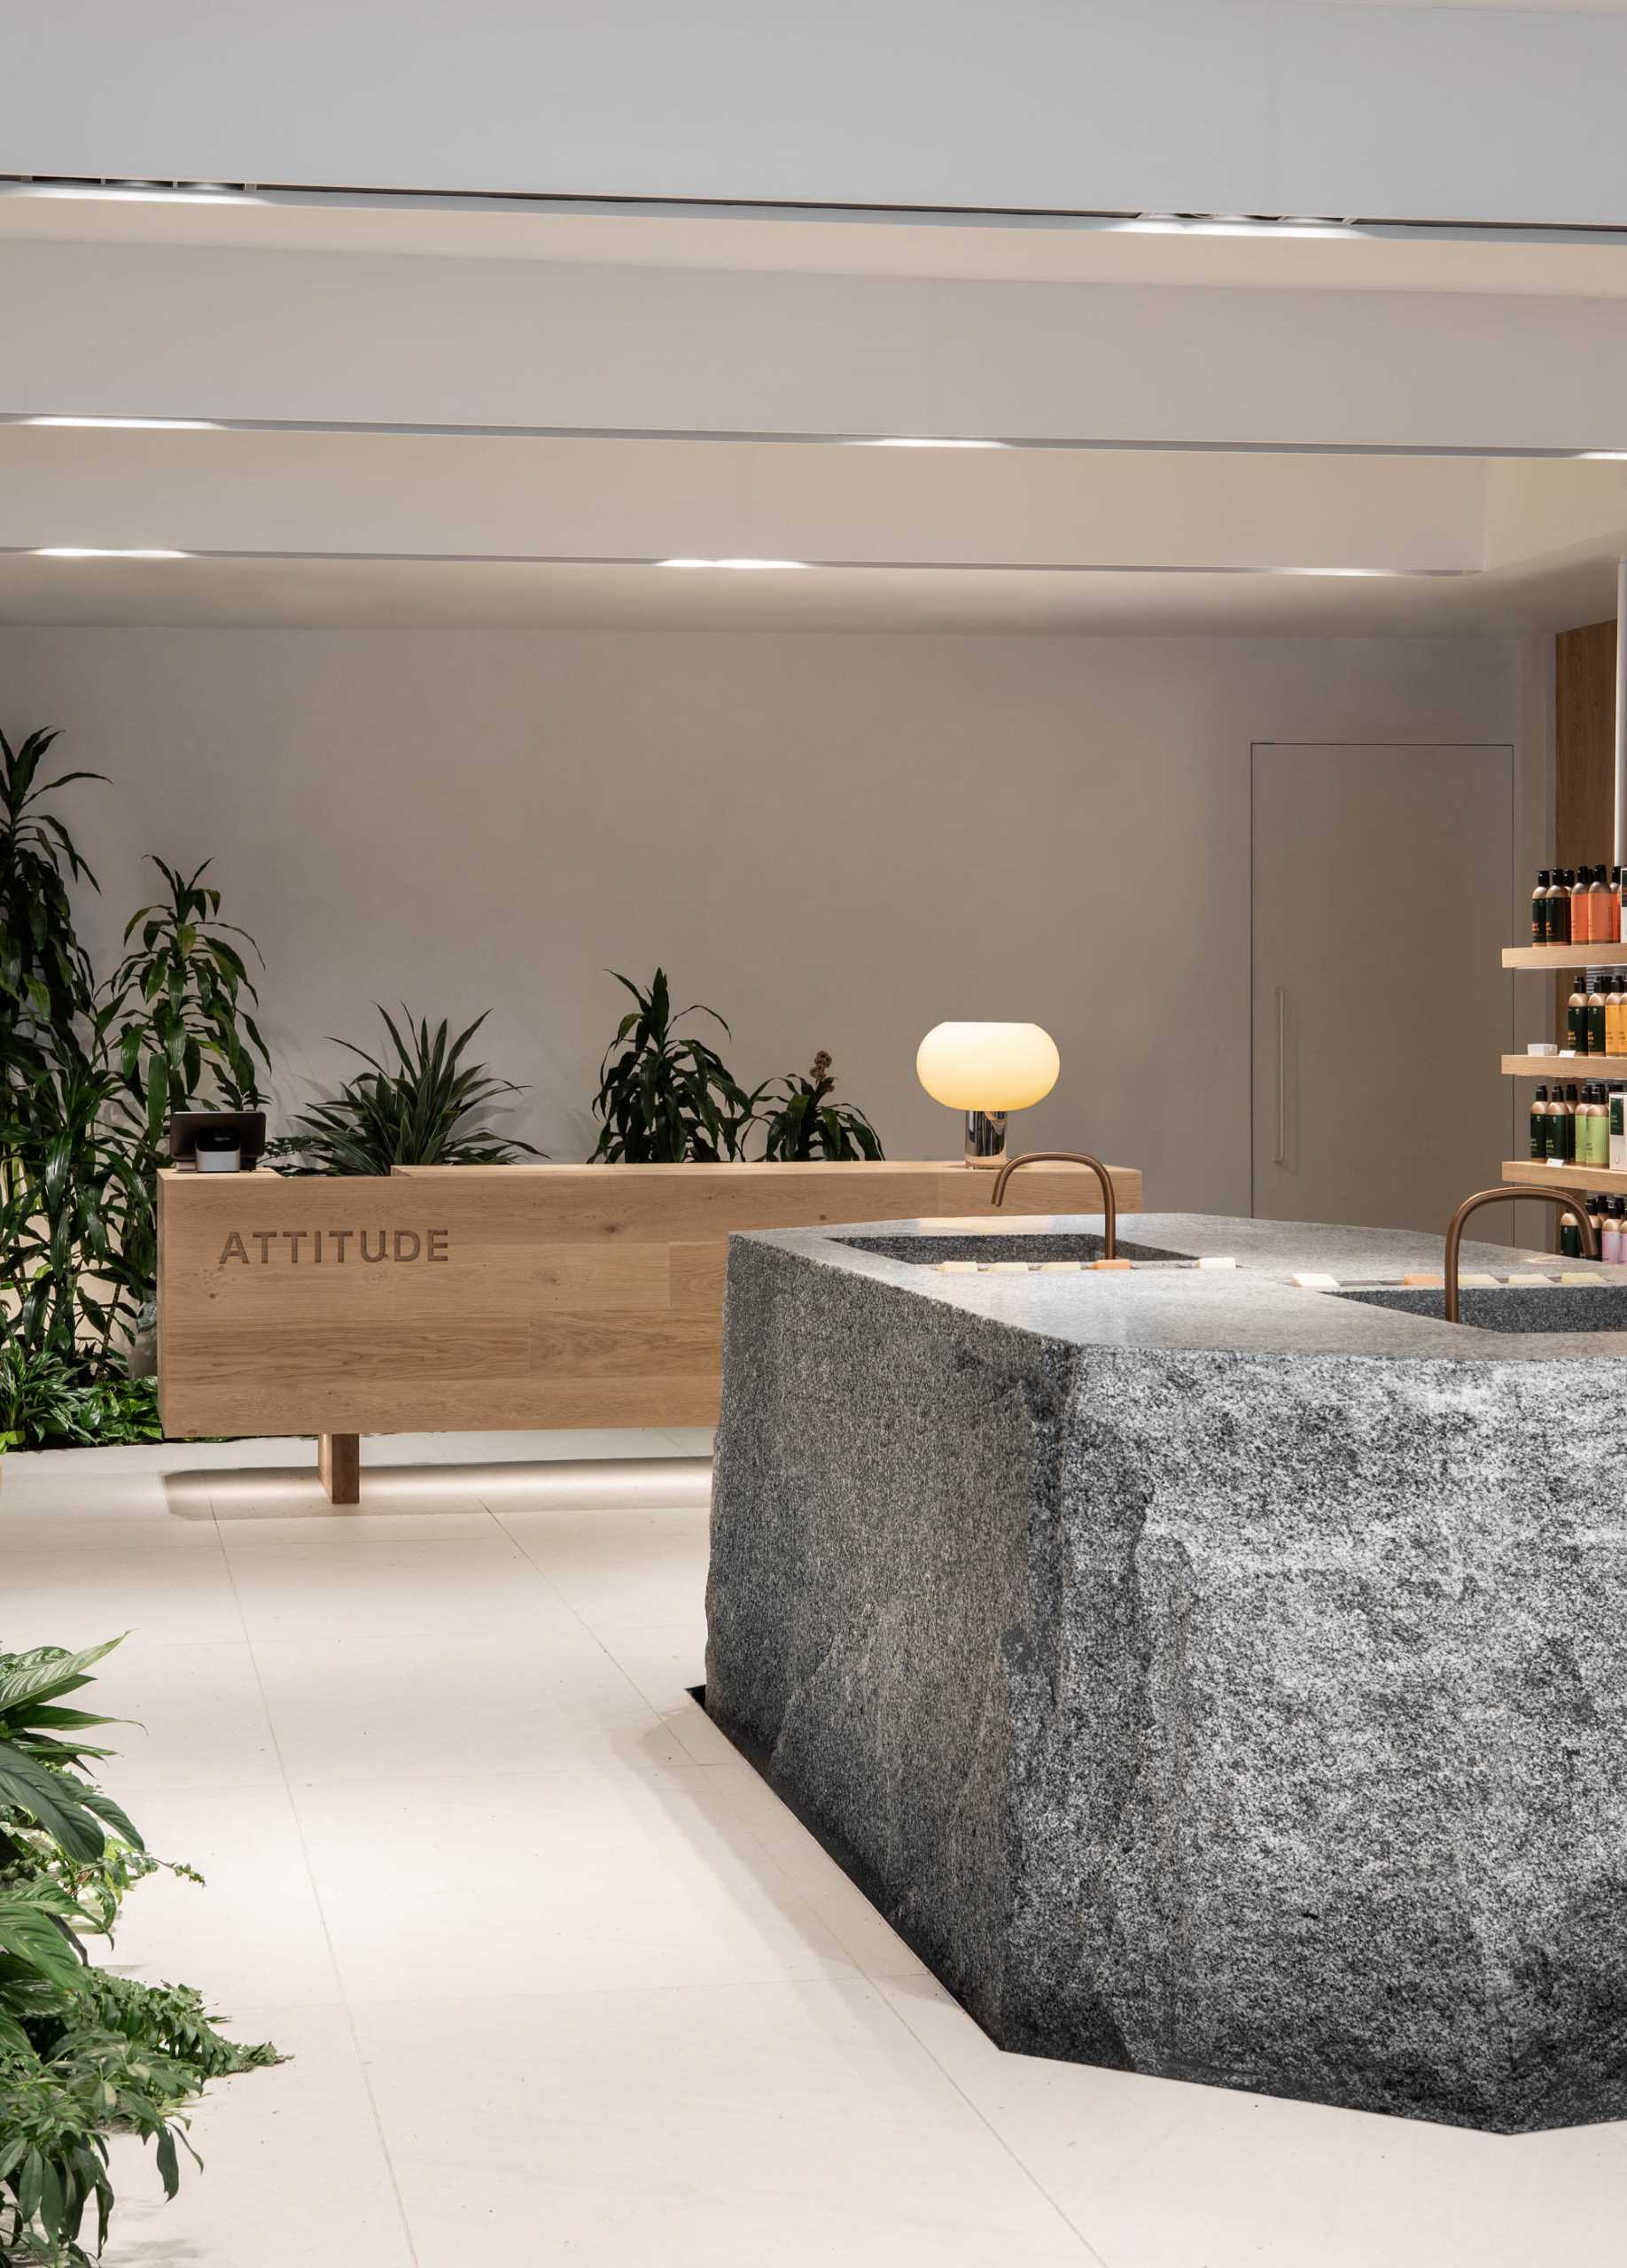 A modern retail store for a beauty brand includes built-in planters and stone accents throughout.